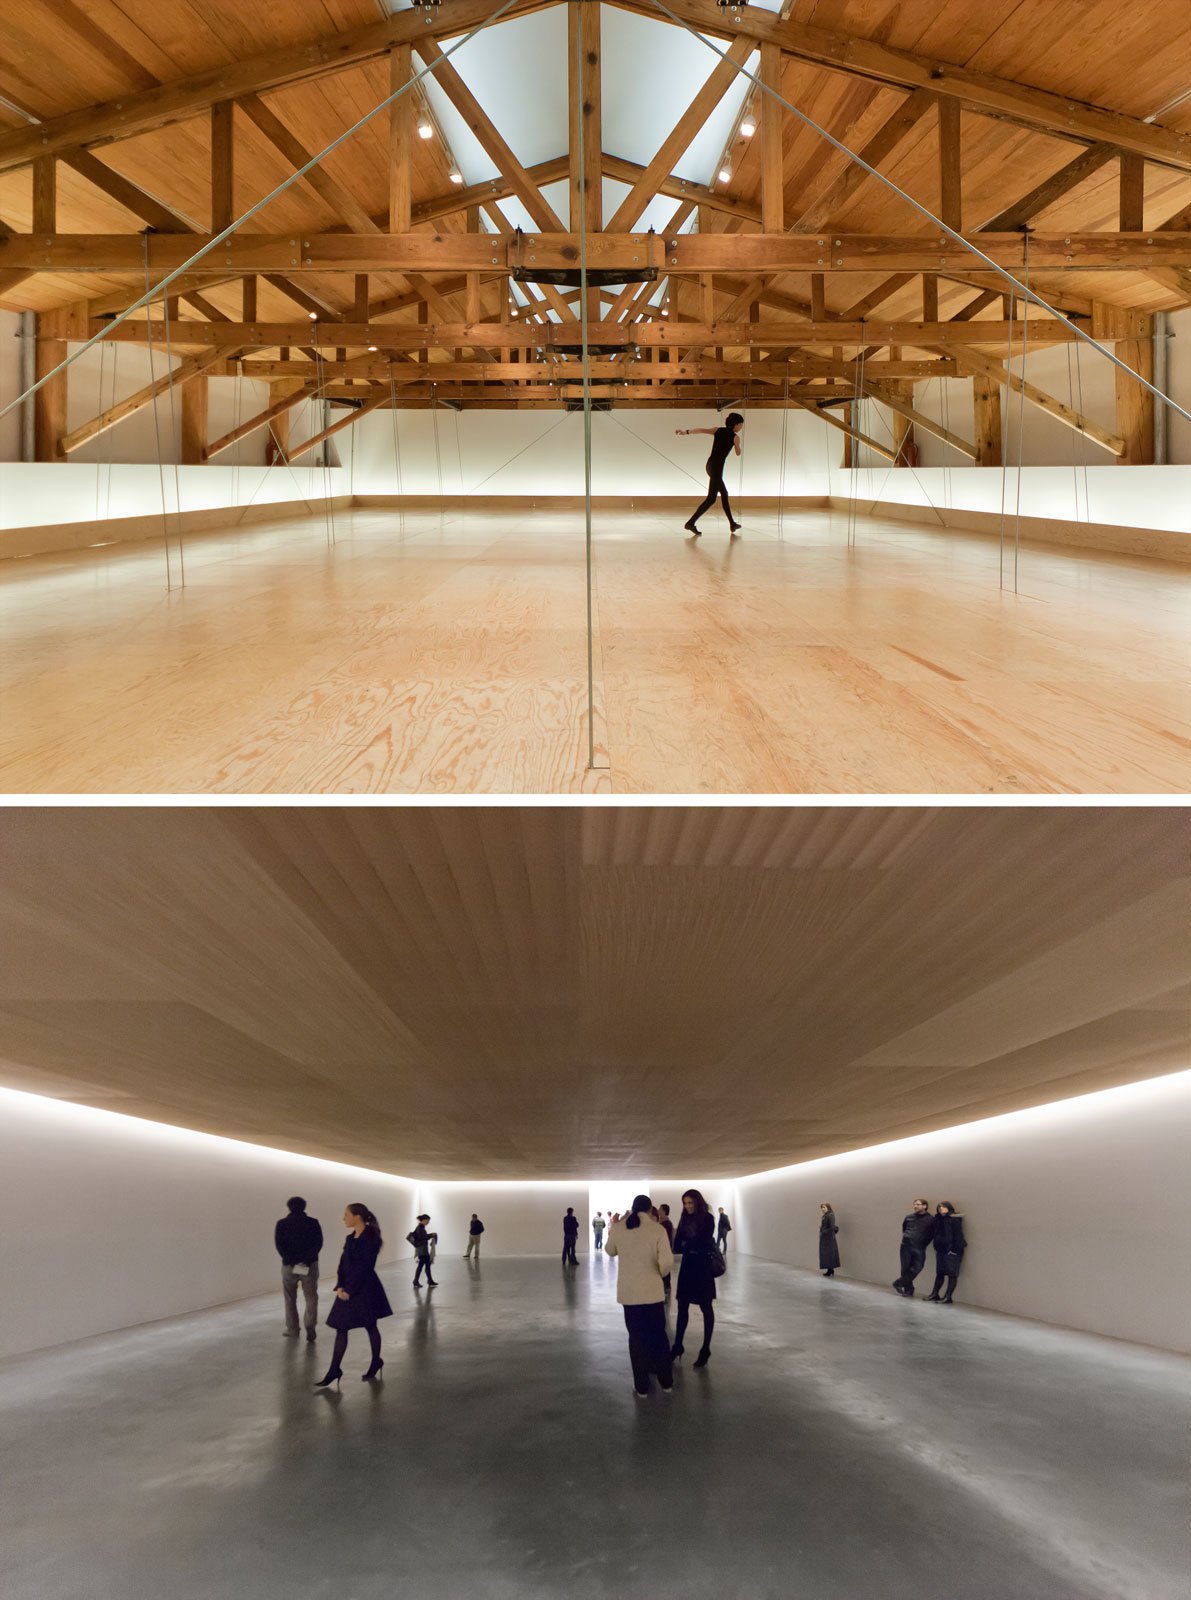 Allora &amp; CalzadillaCompass, 2008Suspended wooden drop ceiling, dancers and six drawings, dimensions variableInstallation view, Kurimanzutto Gallery, Mexico CityPhoto: Michel Zab&eacute; Thiria&copy; Allora &amp; Calzadilla